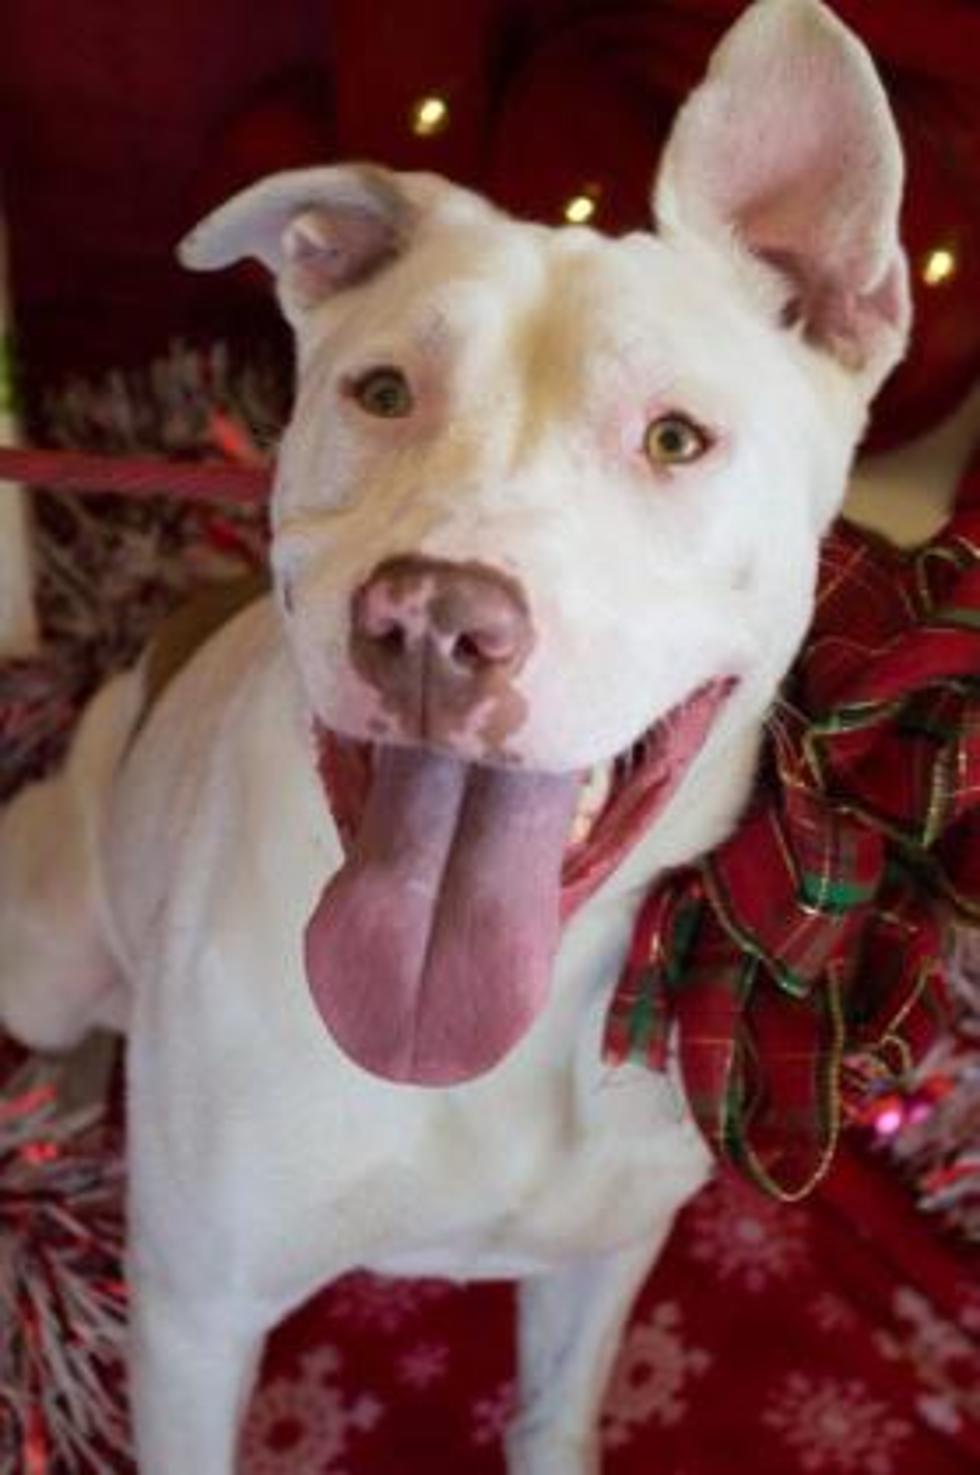 Meet Candy - Christine's Pet of the Week!